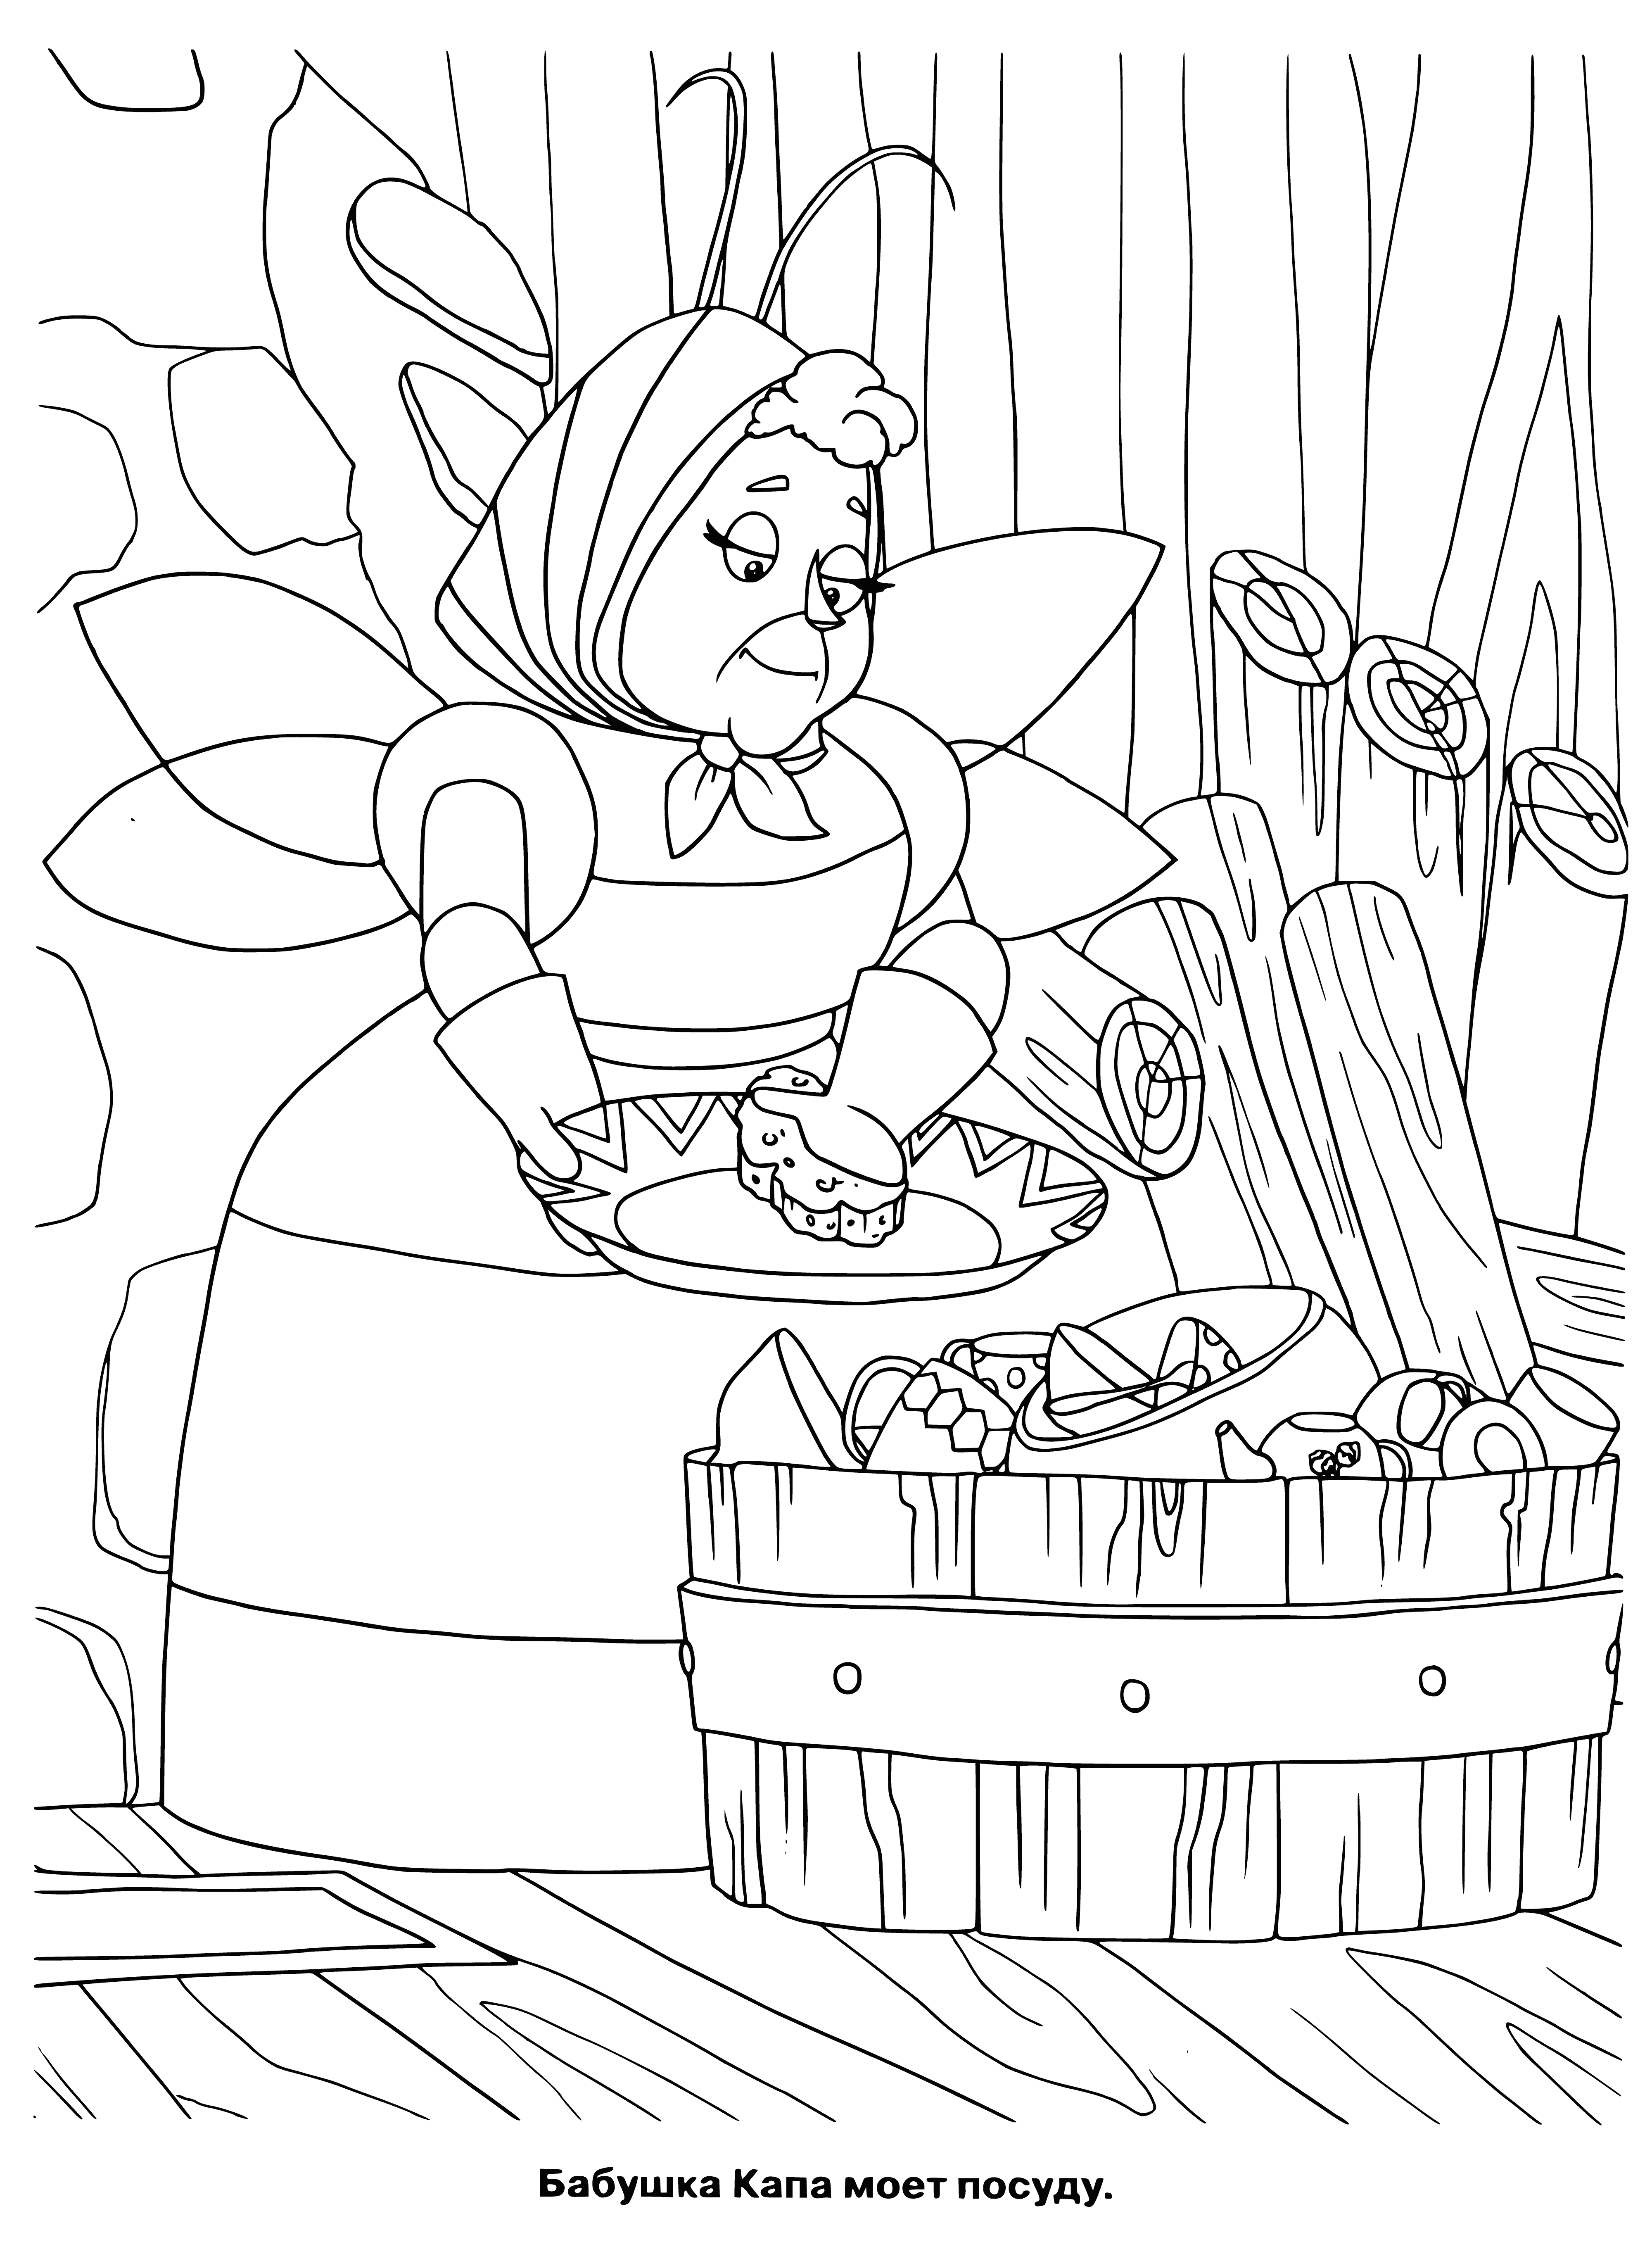 coloring page: Luntik and friends help in the kitchen: Luntik washes dishes while Baba Kapa assists.